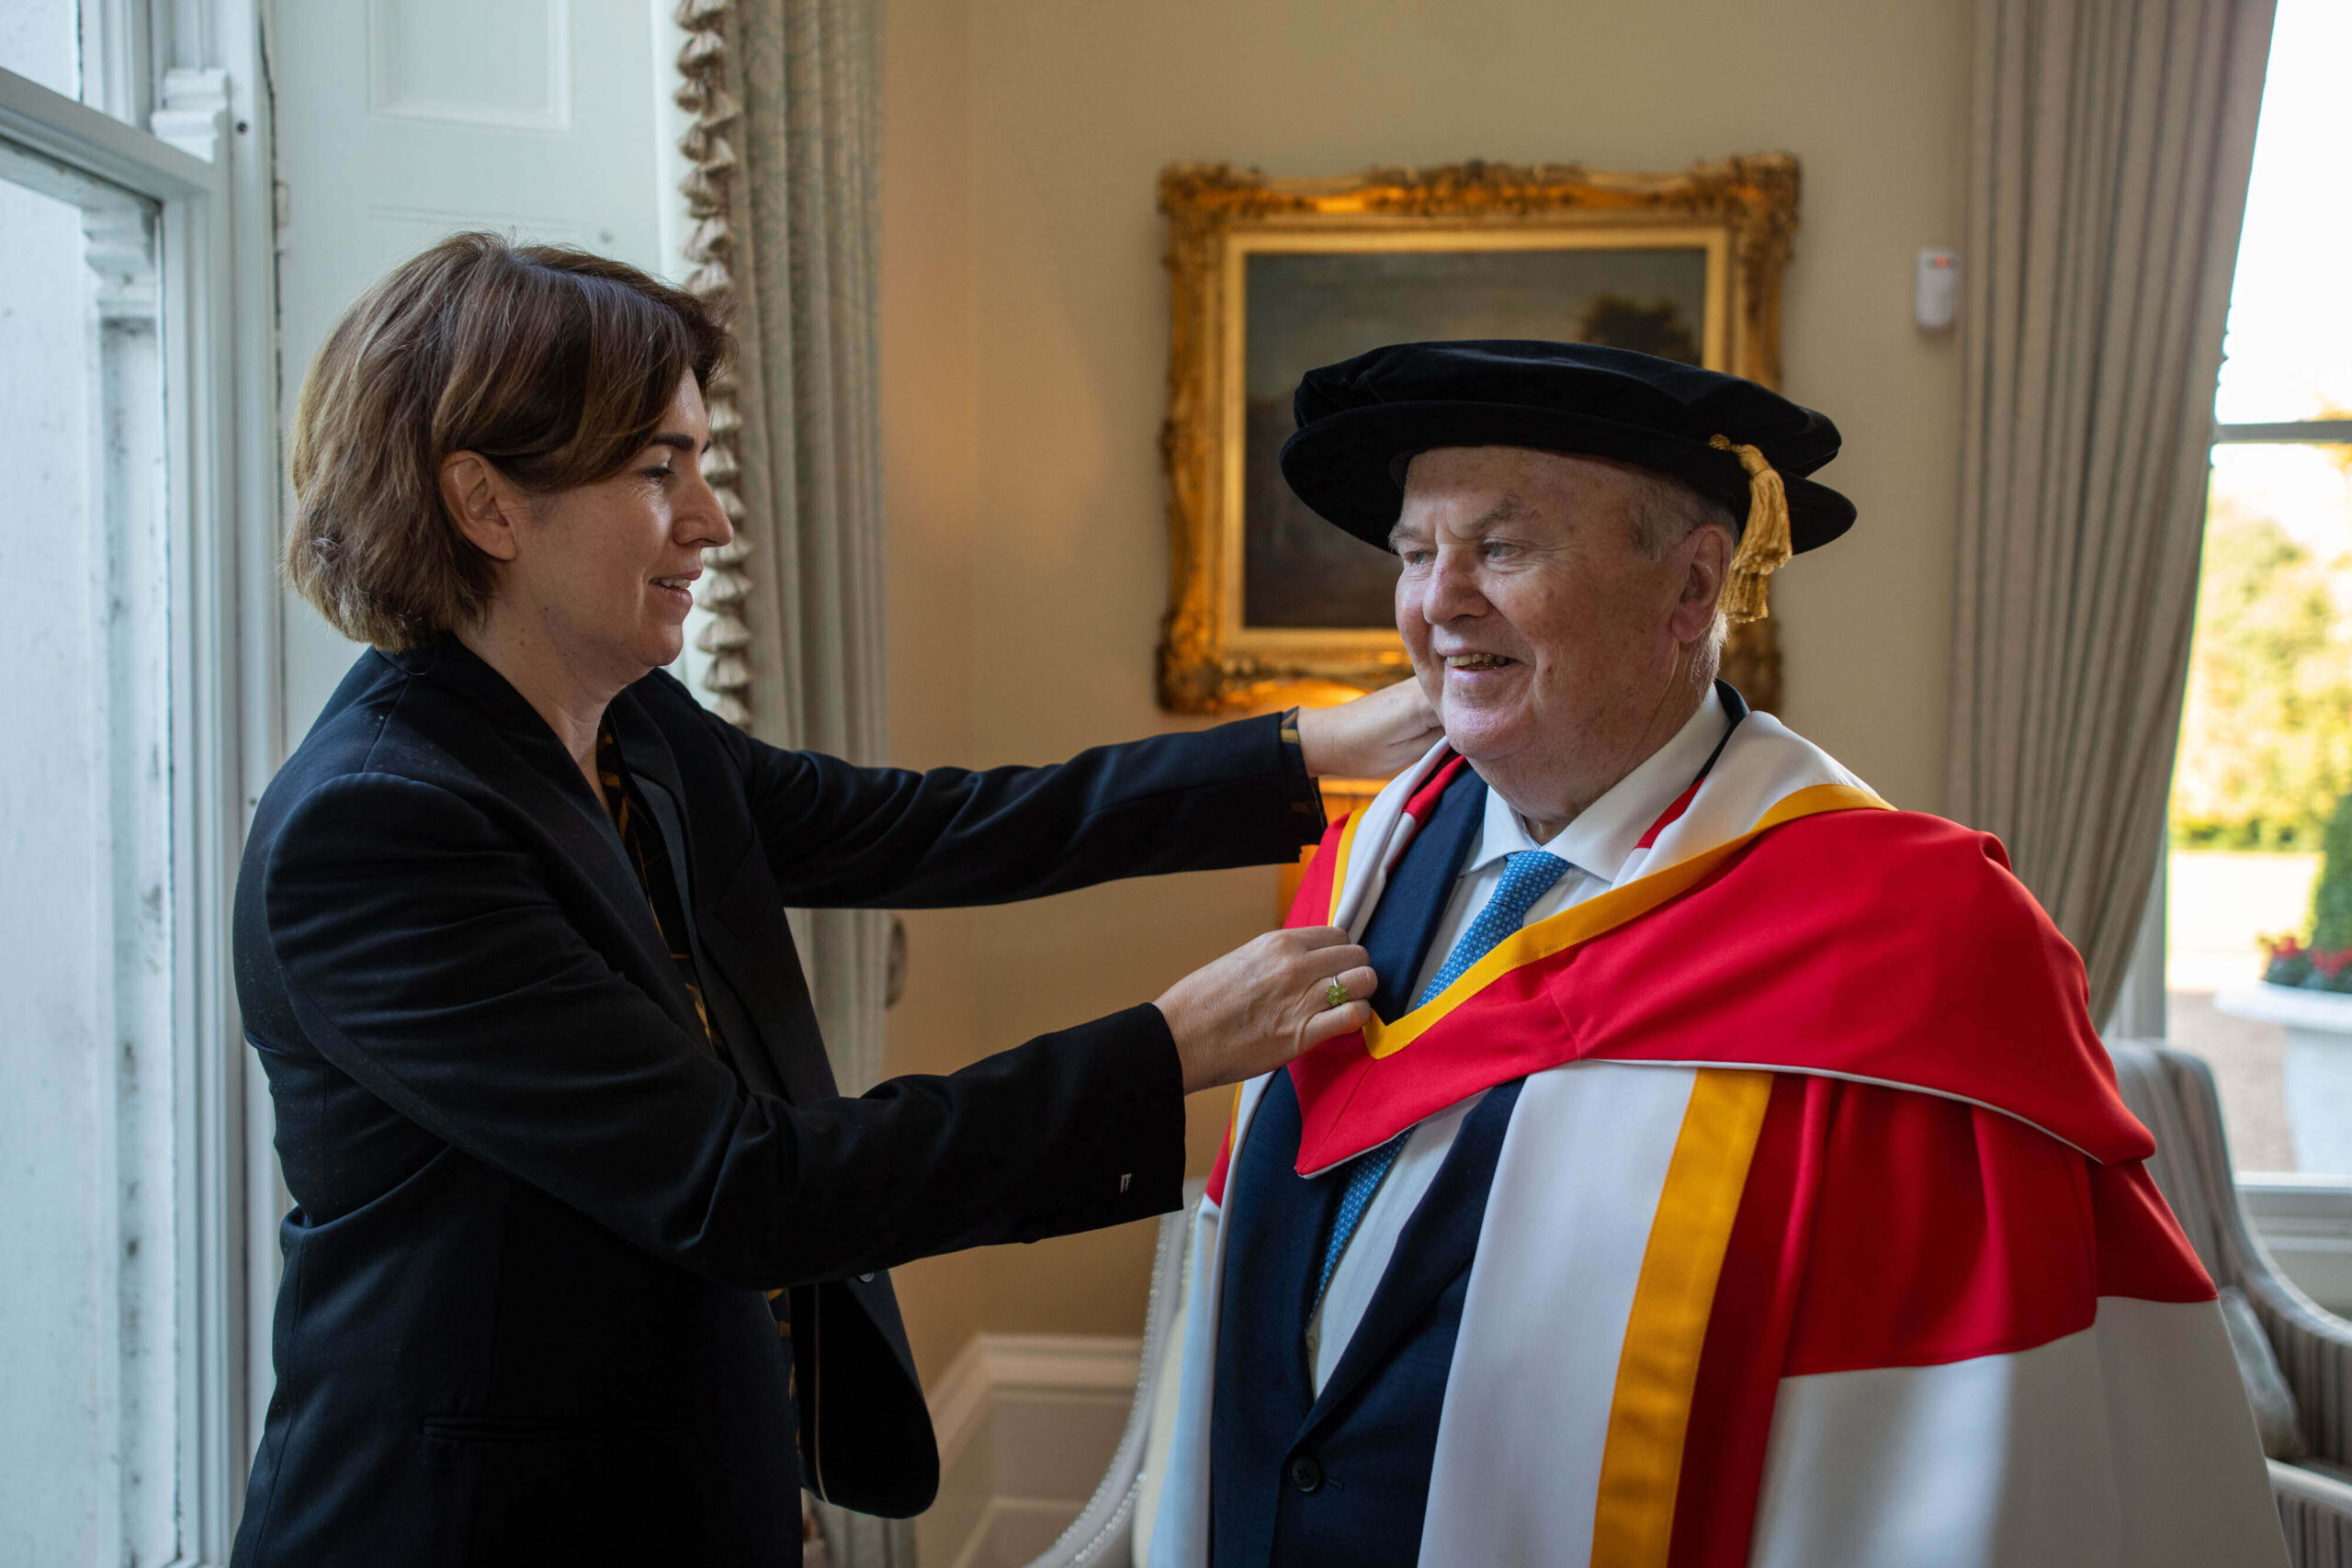 UL honorary doctorates Former Minister Michael Noonan pictured with his daughter Orla Baulman. Picture: Sean Curtin/True Media.